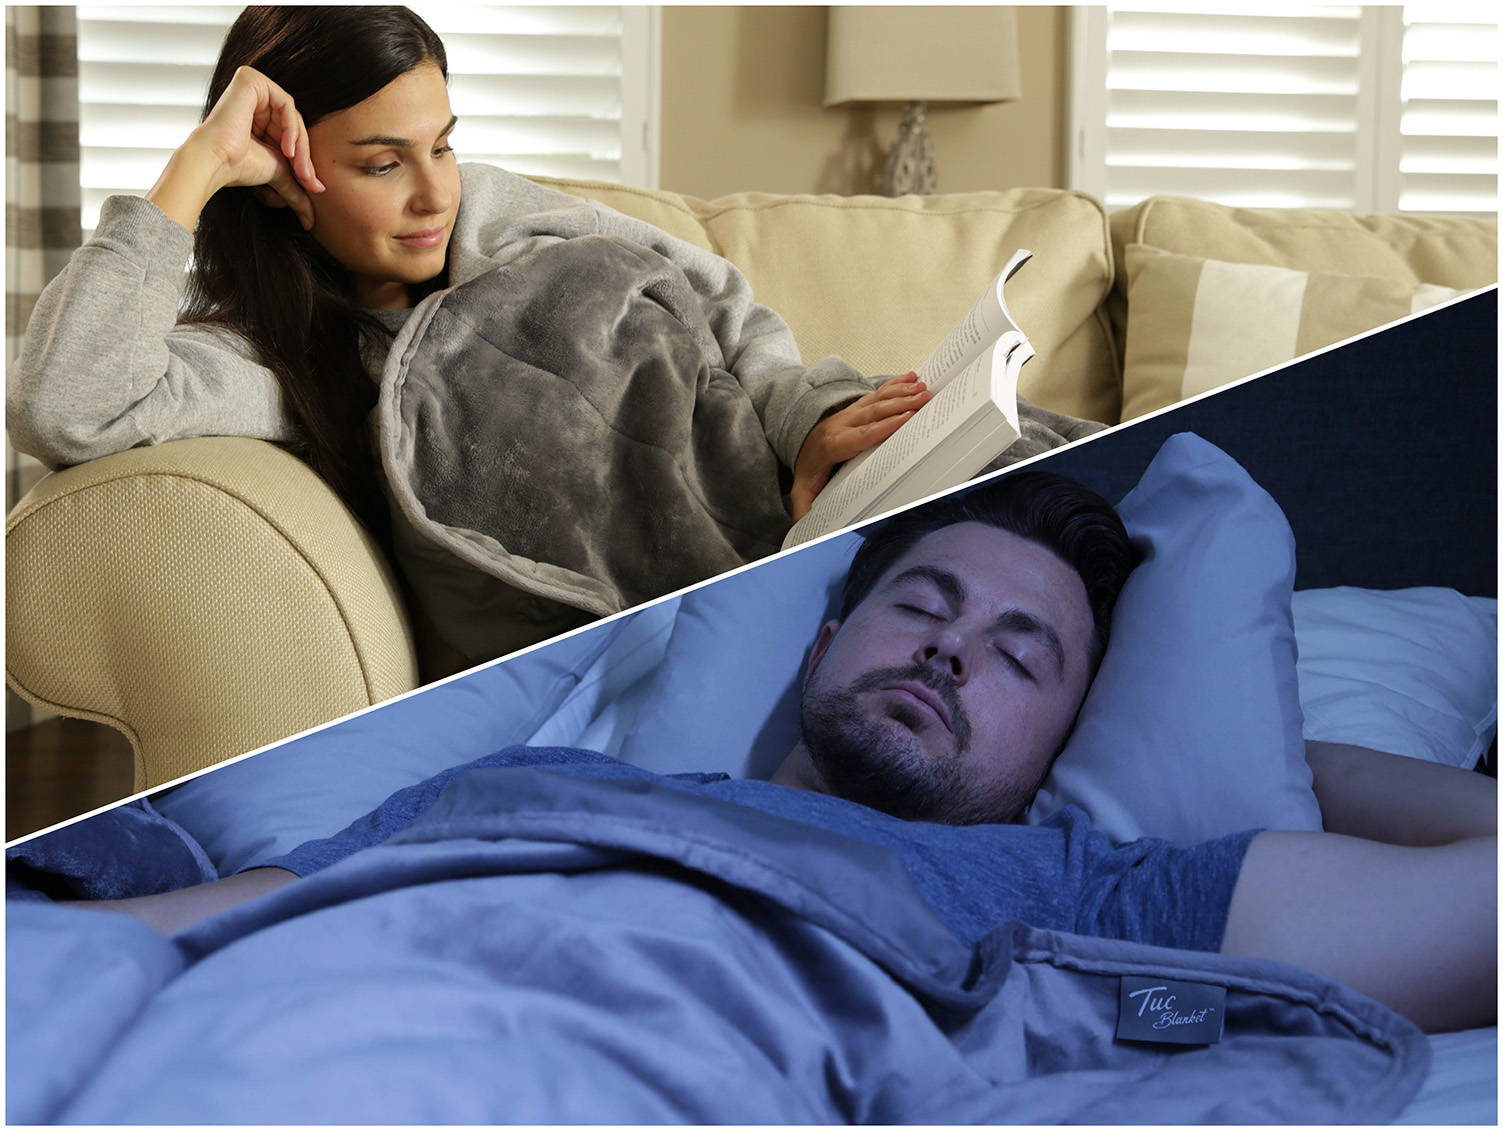 Two part image. Woman reading on the couch with a Tuc Warm weighted blanket. Man sleeps peacefully with the tuc Cool weighted blanket.